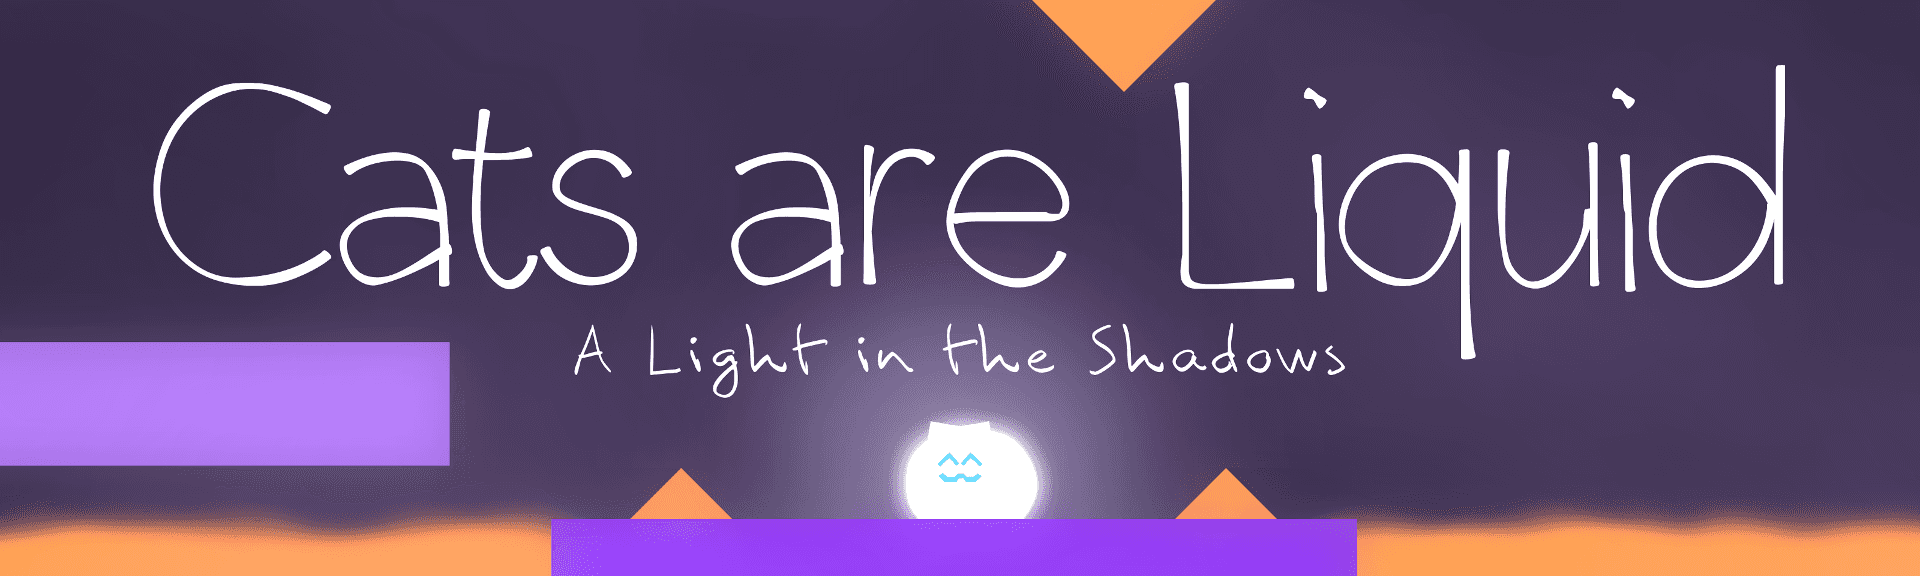 Cats are Liquid - A Light in the Shadows logo